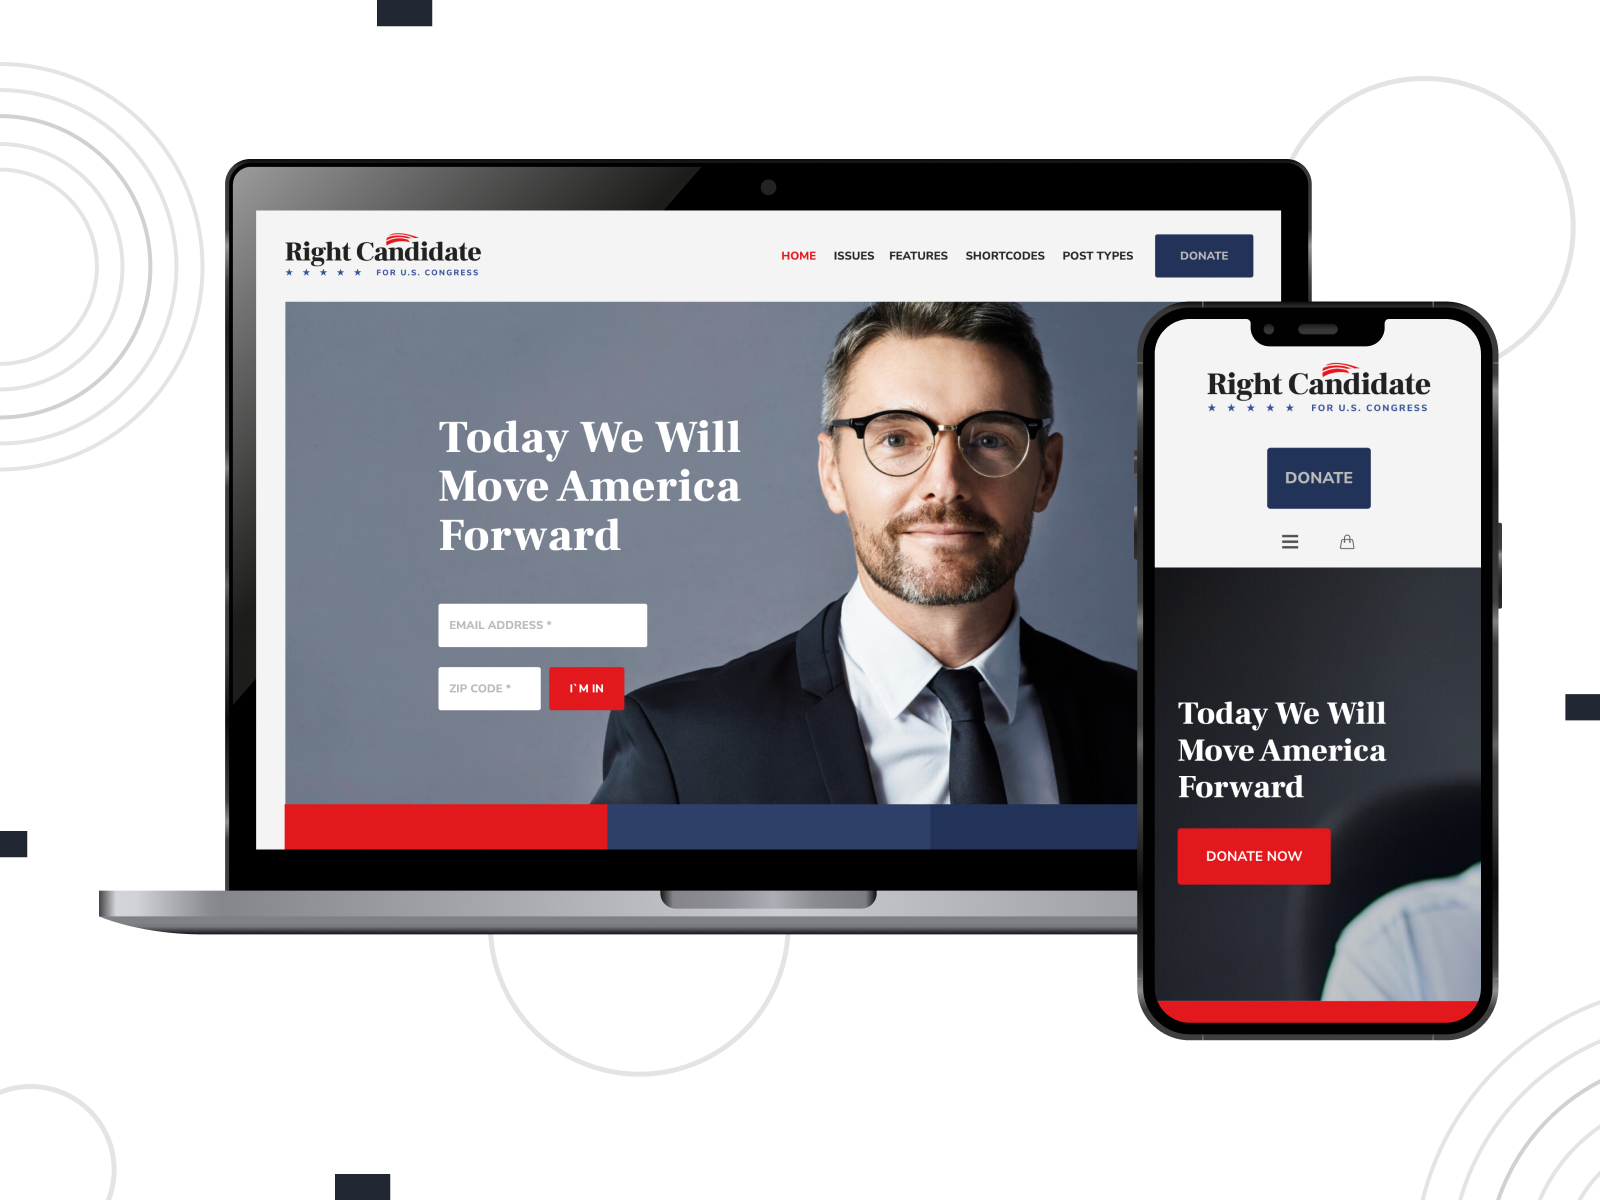 Artwork of Right Candidate - editable theme for political candidates with eCommerce-ready shop pages in white, midnightblue, and red colorway.